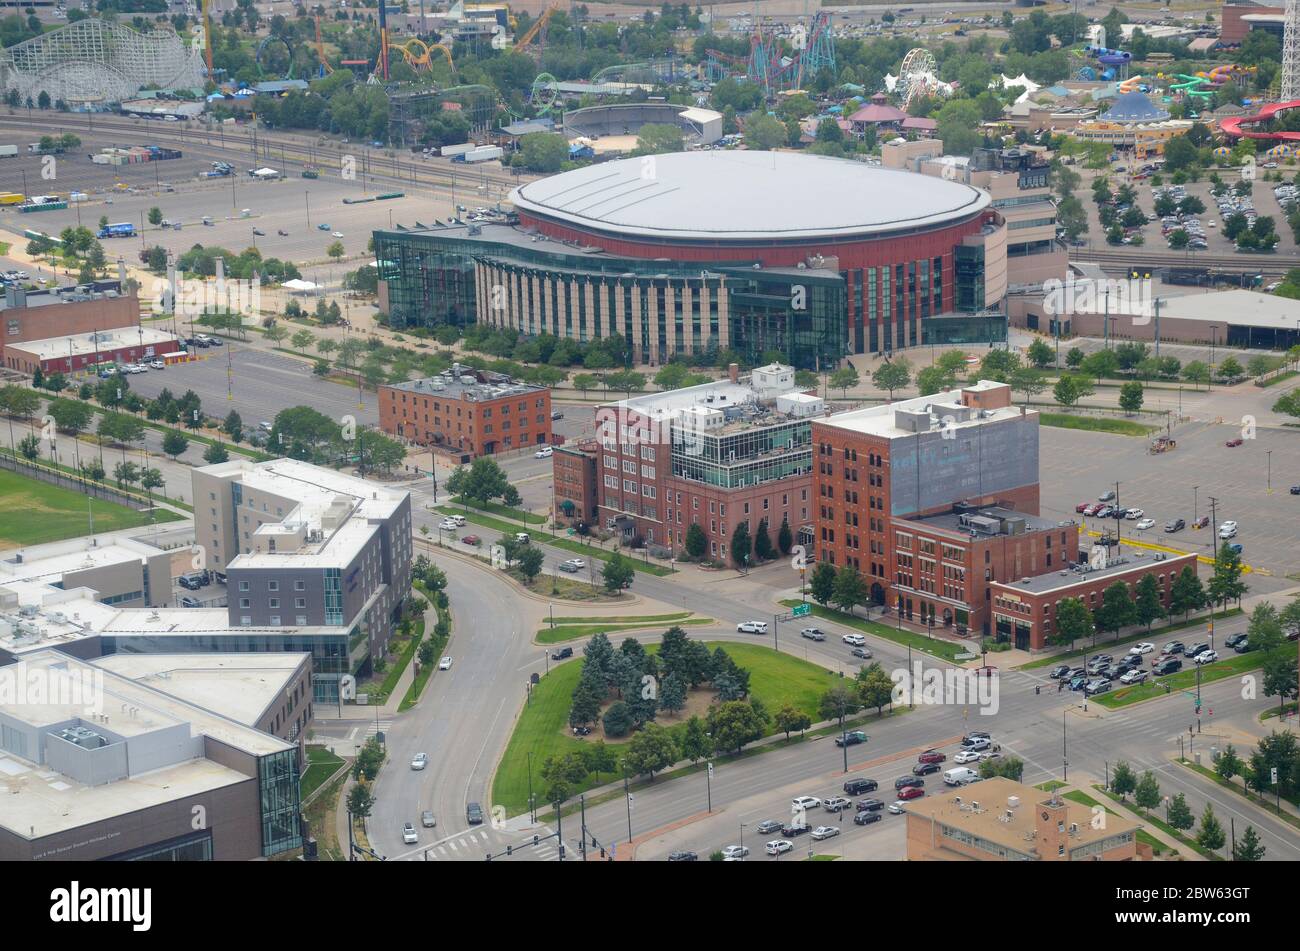 Northwest Aerial view of Denver, Colorado, towards Ball Arena / Pepsi Center, Elitch Gardens, and the intersection of Auraria Parkway and Speer Blvd. Stock Photo